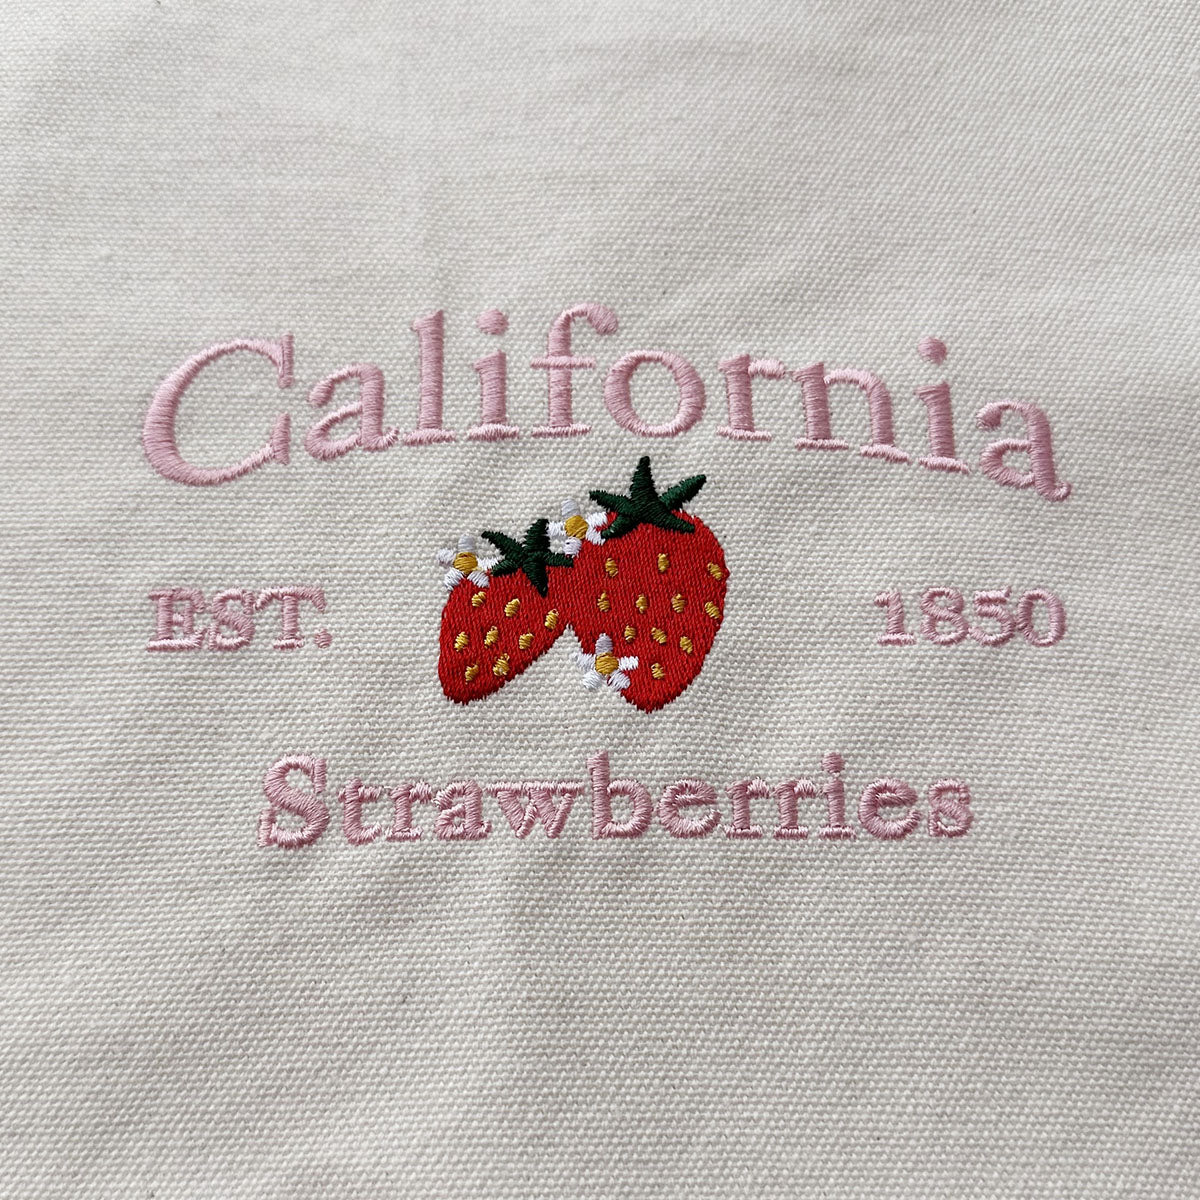 California Strawberries Preppy Aesthetic Embroidered Tote Bag